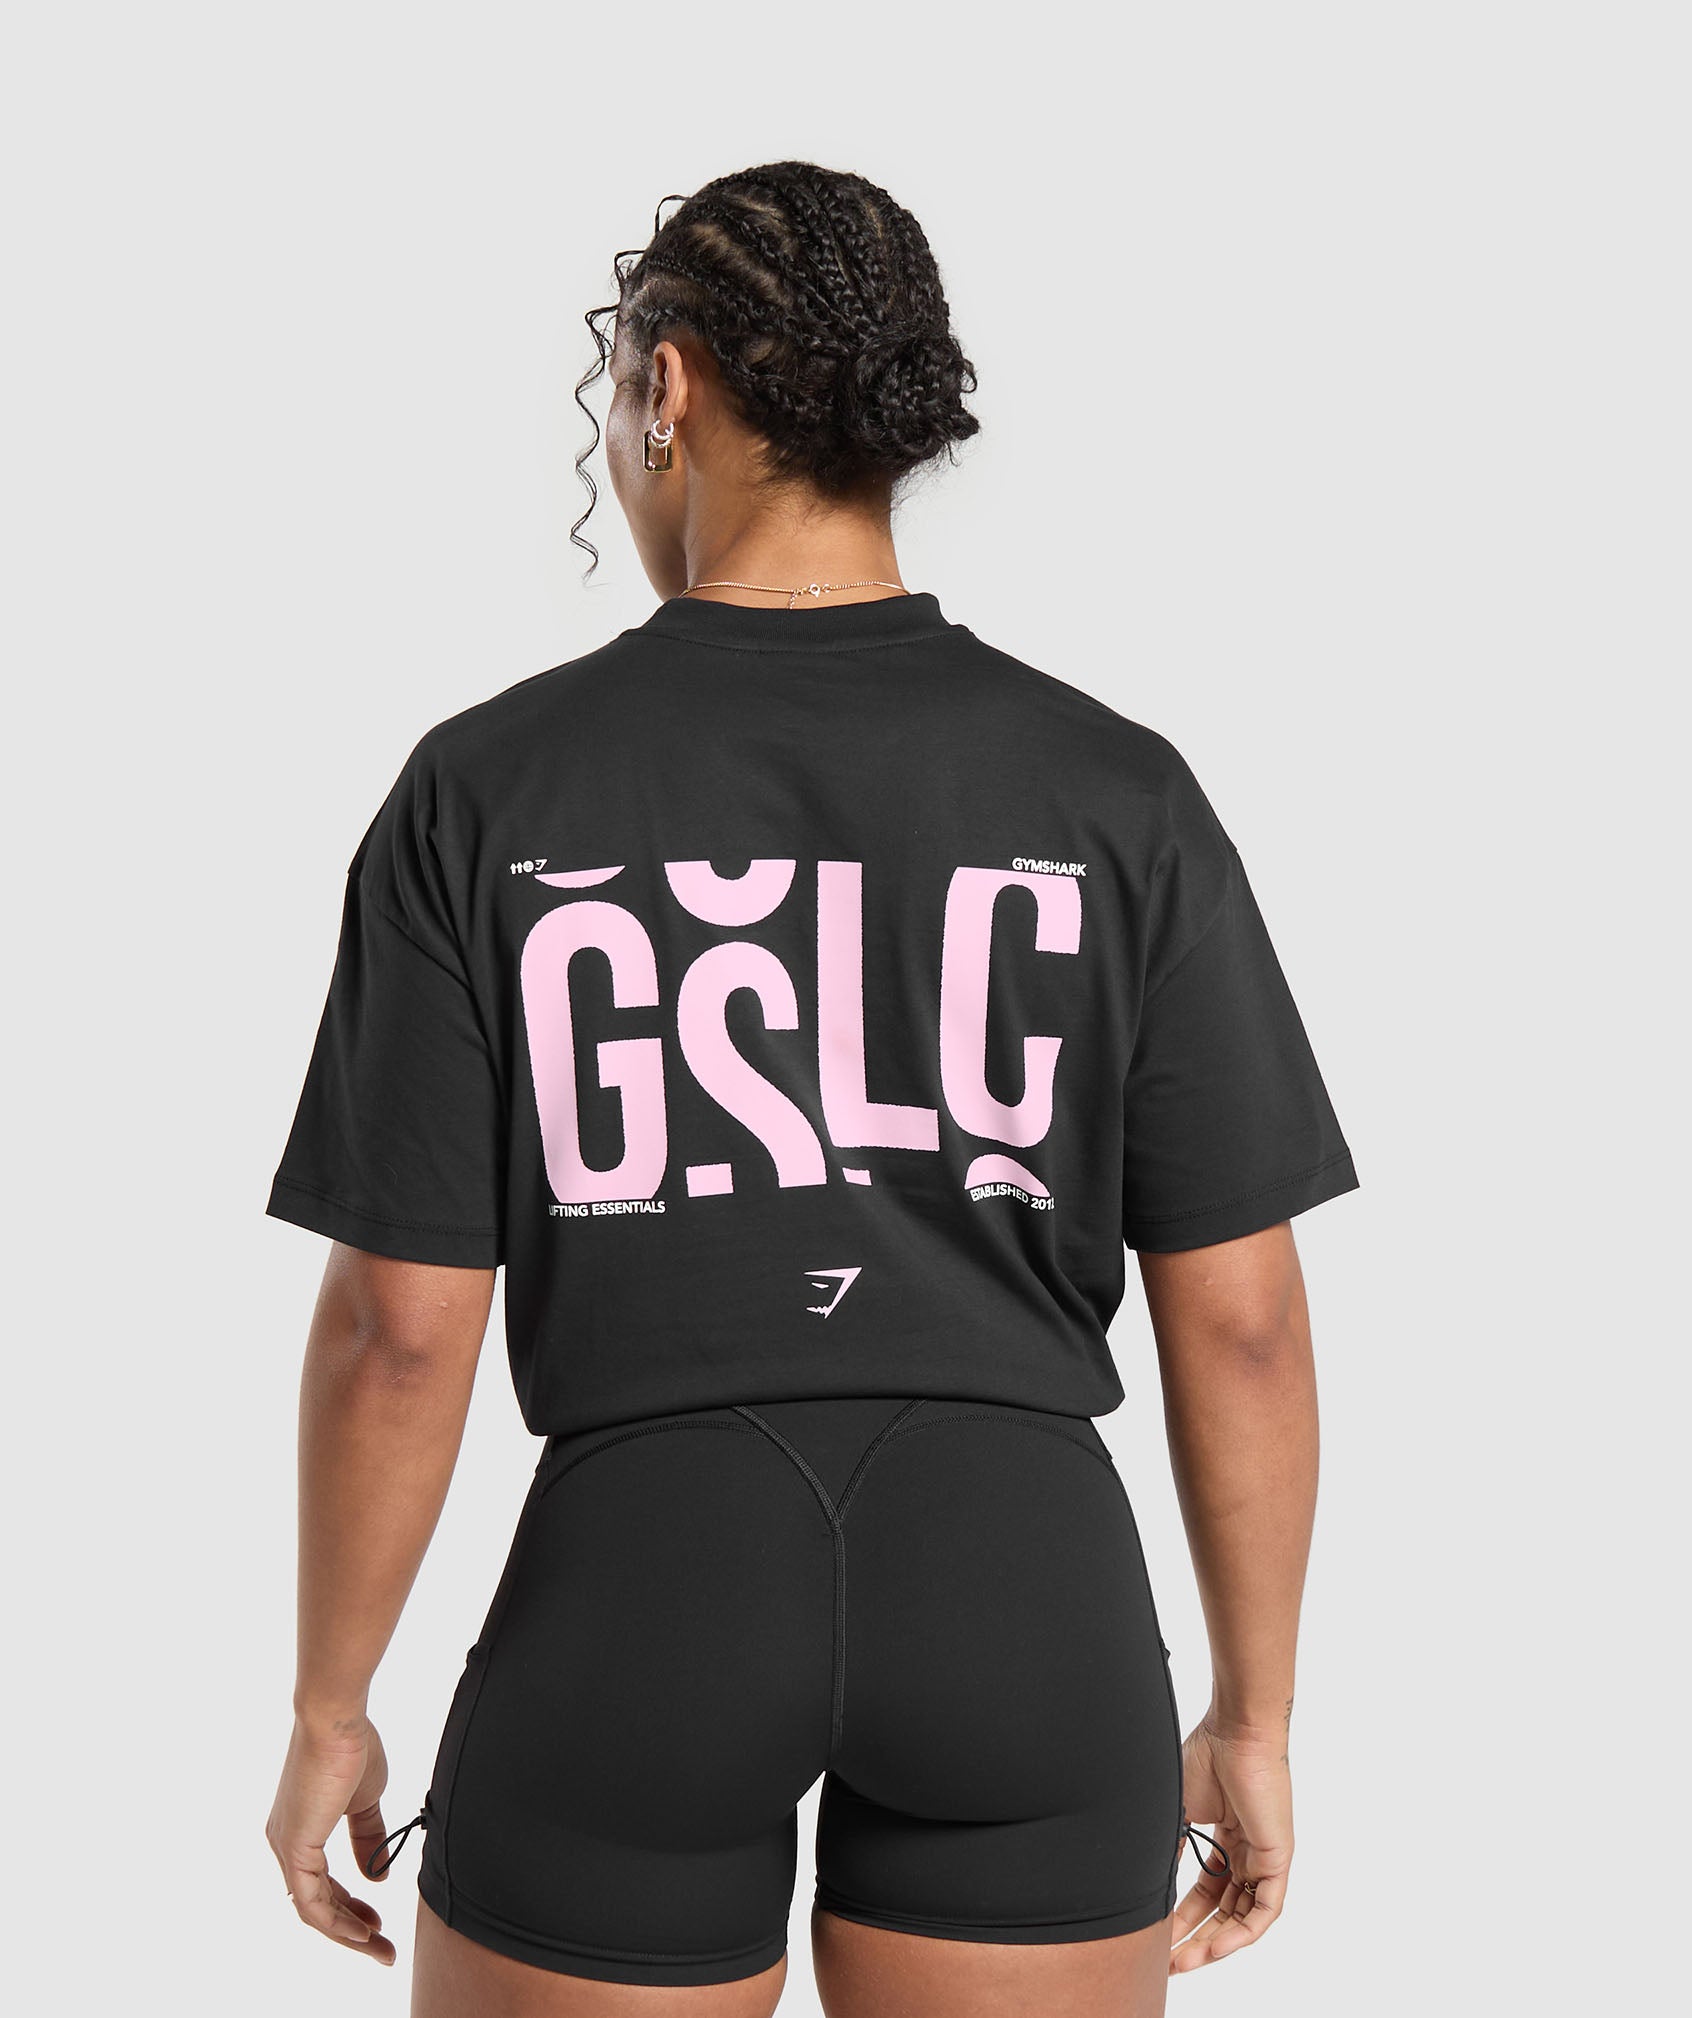 GSLC OS Tee in Black